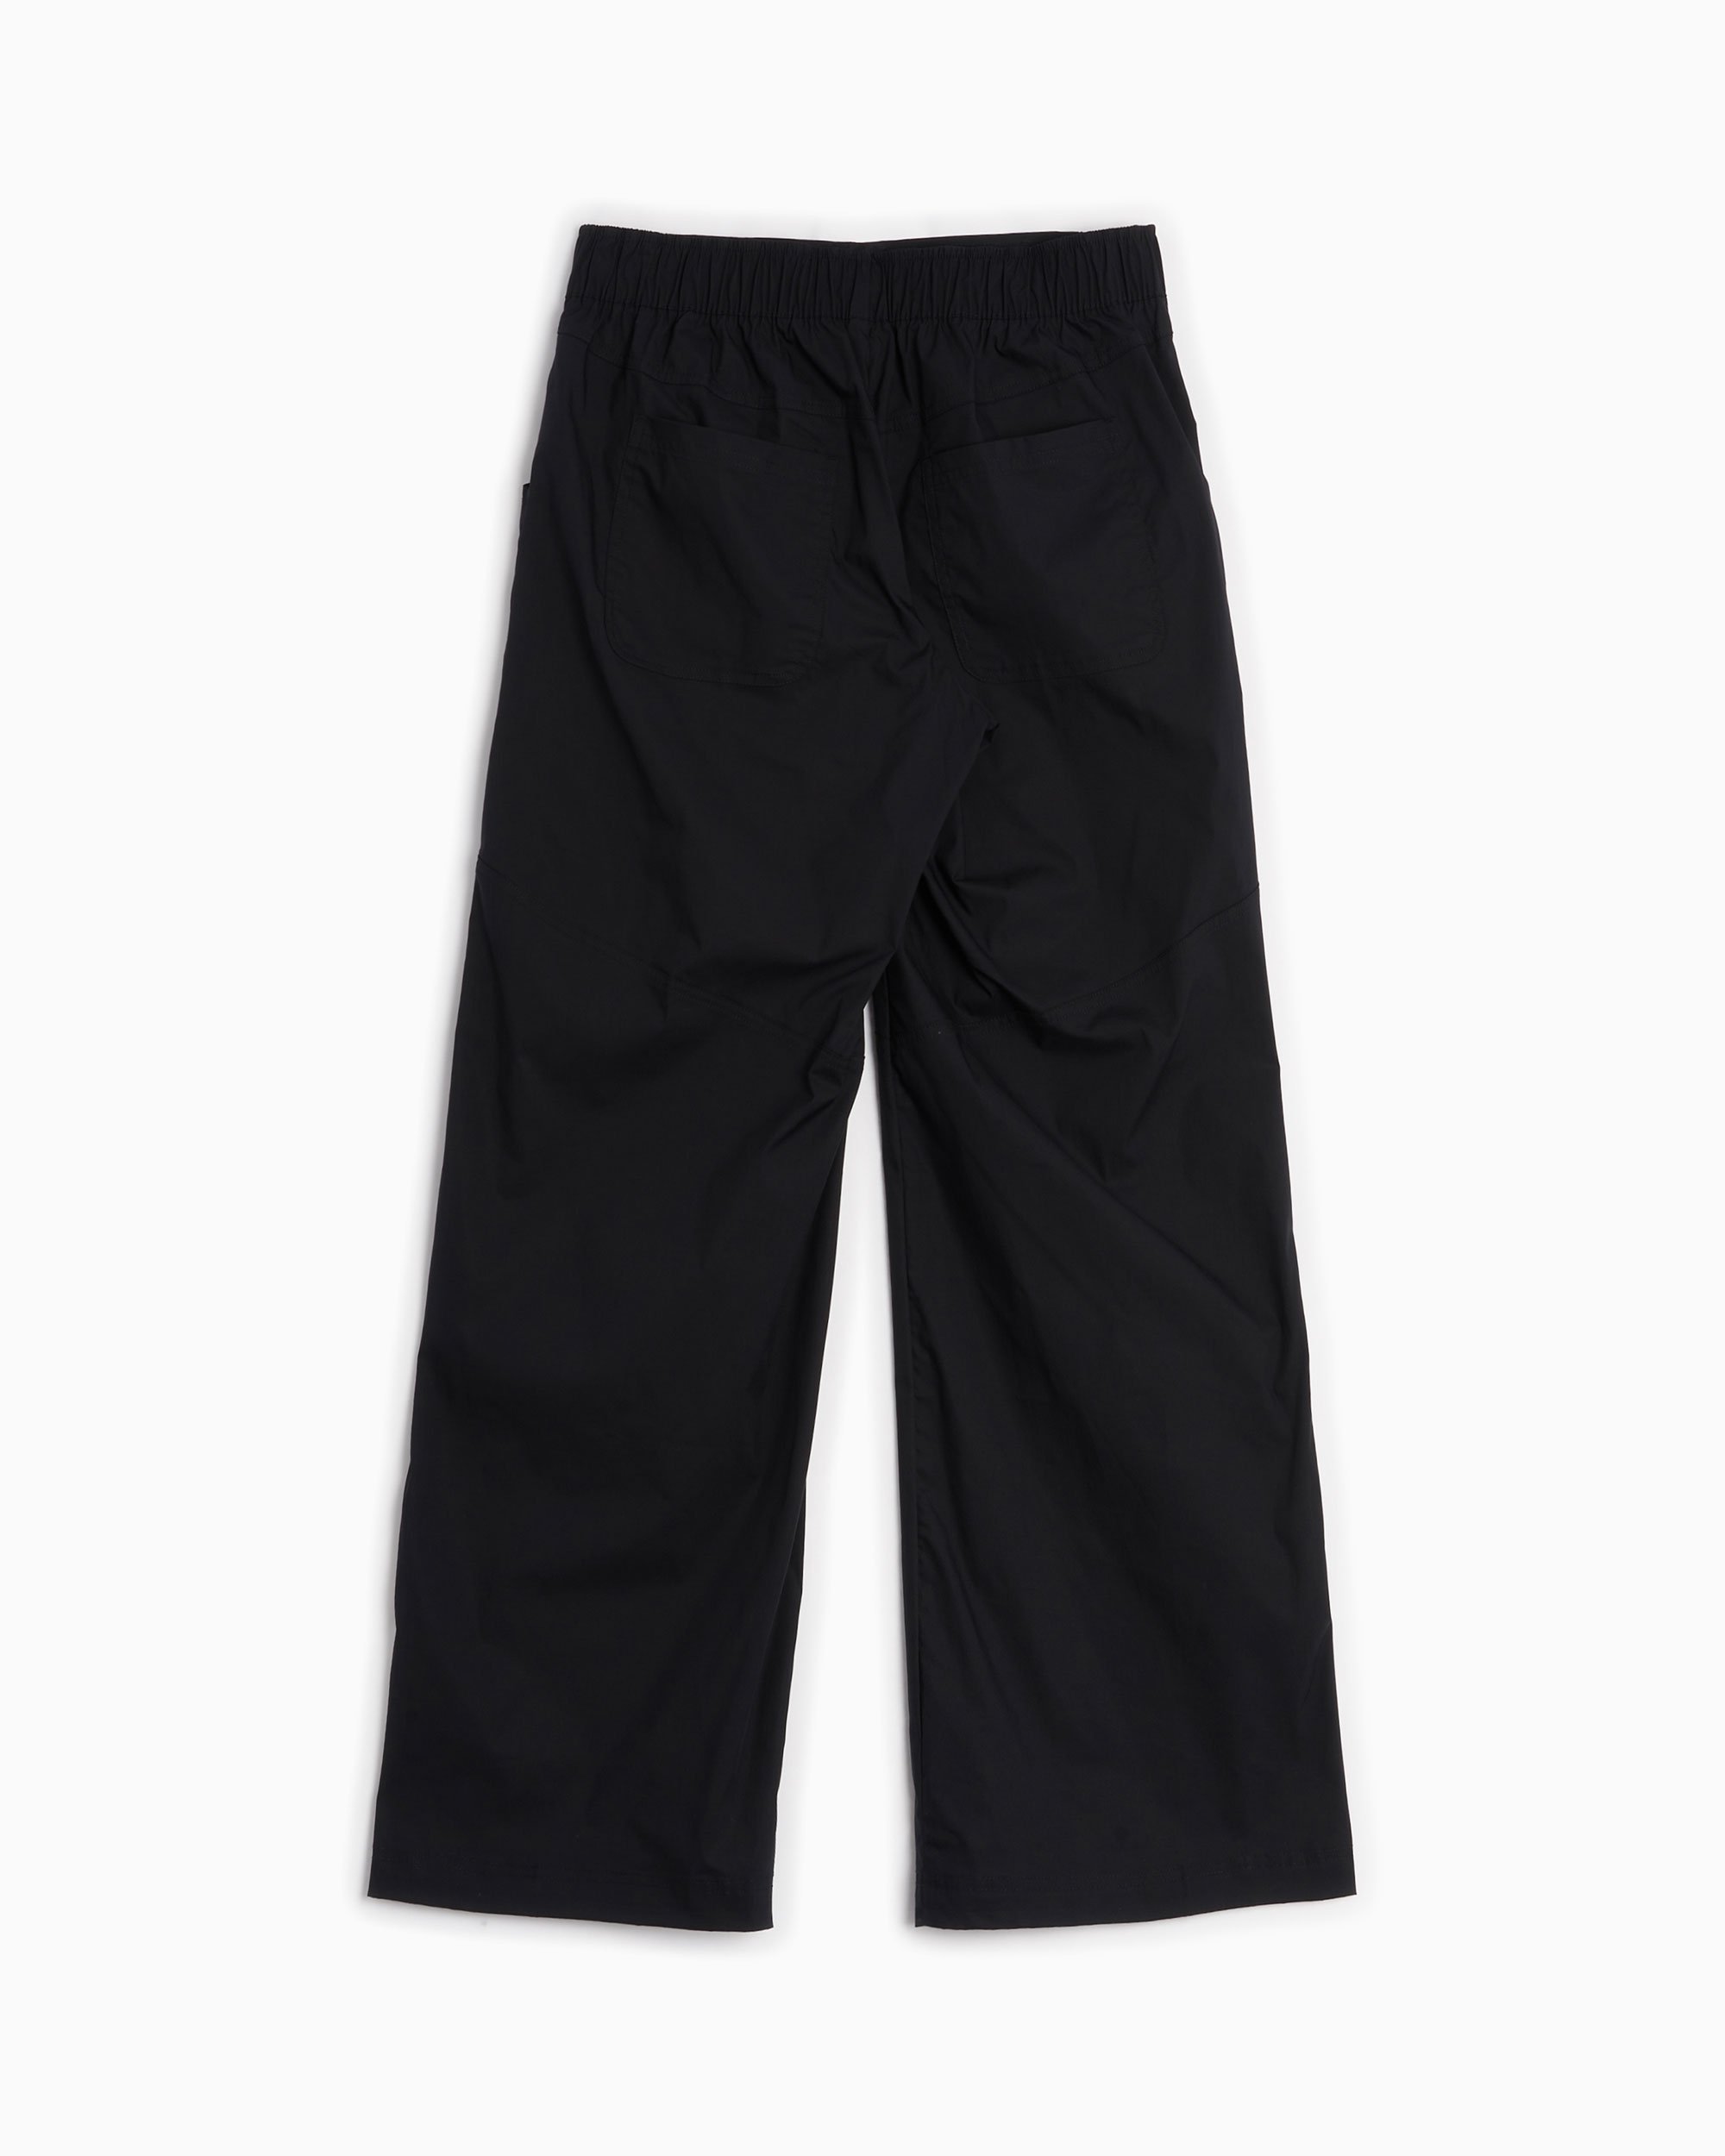 Nike NSW Essentials Woven High Rise Trousers Womens Pants Black FB8284-010  – Shoe Palace